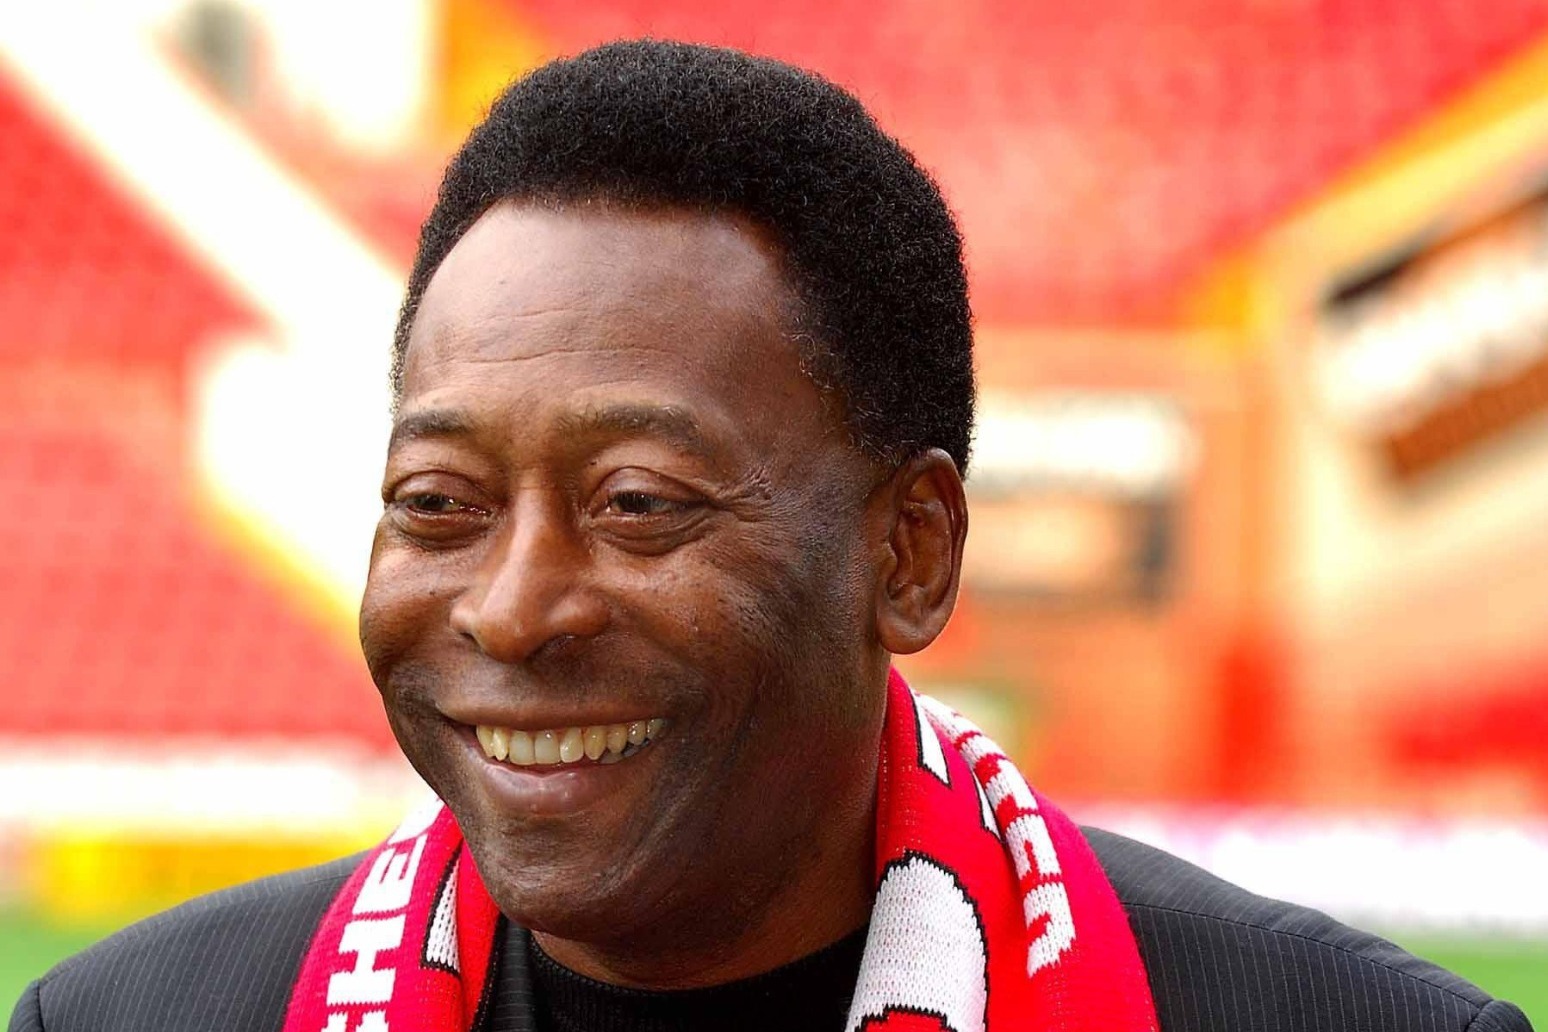 Pele’s influence on football will be ‘eternal’, says Pep Guardiola 